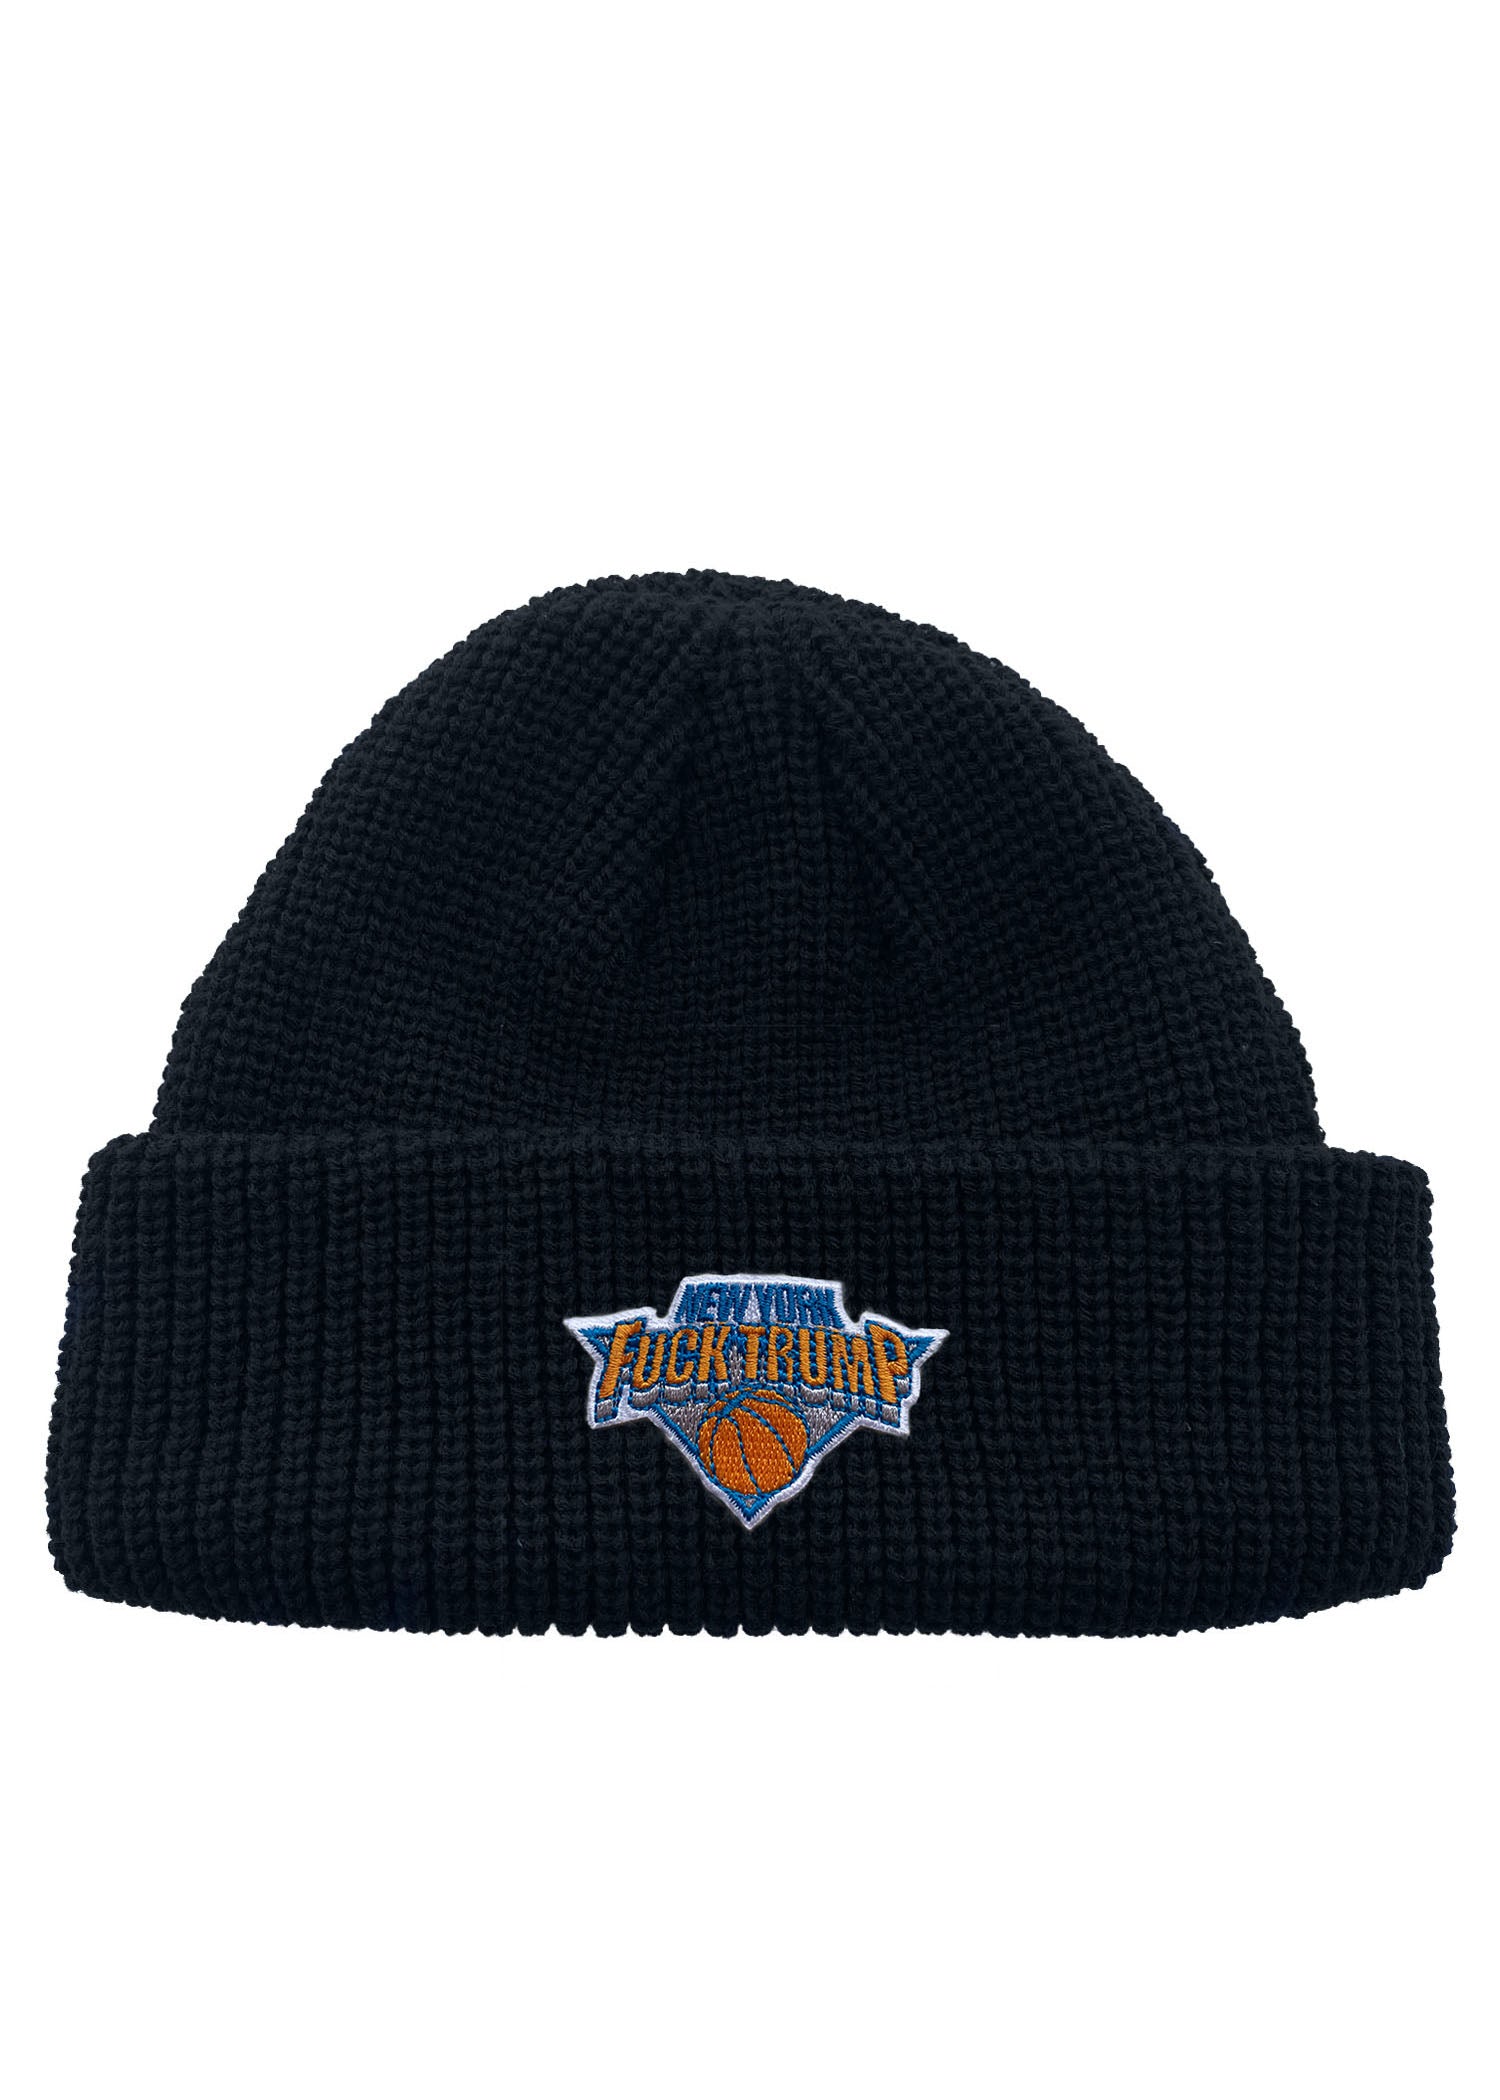 Fuck Trump NY Hoops Patch Rollup Fisherman Knit Beanie